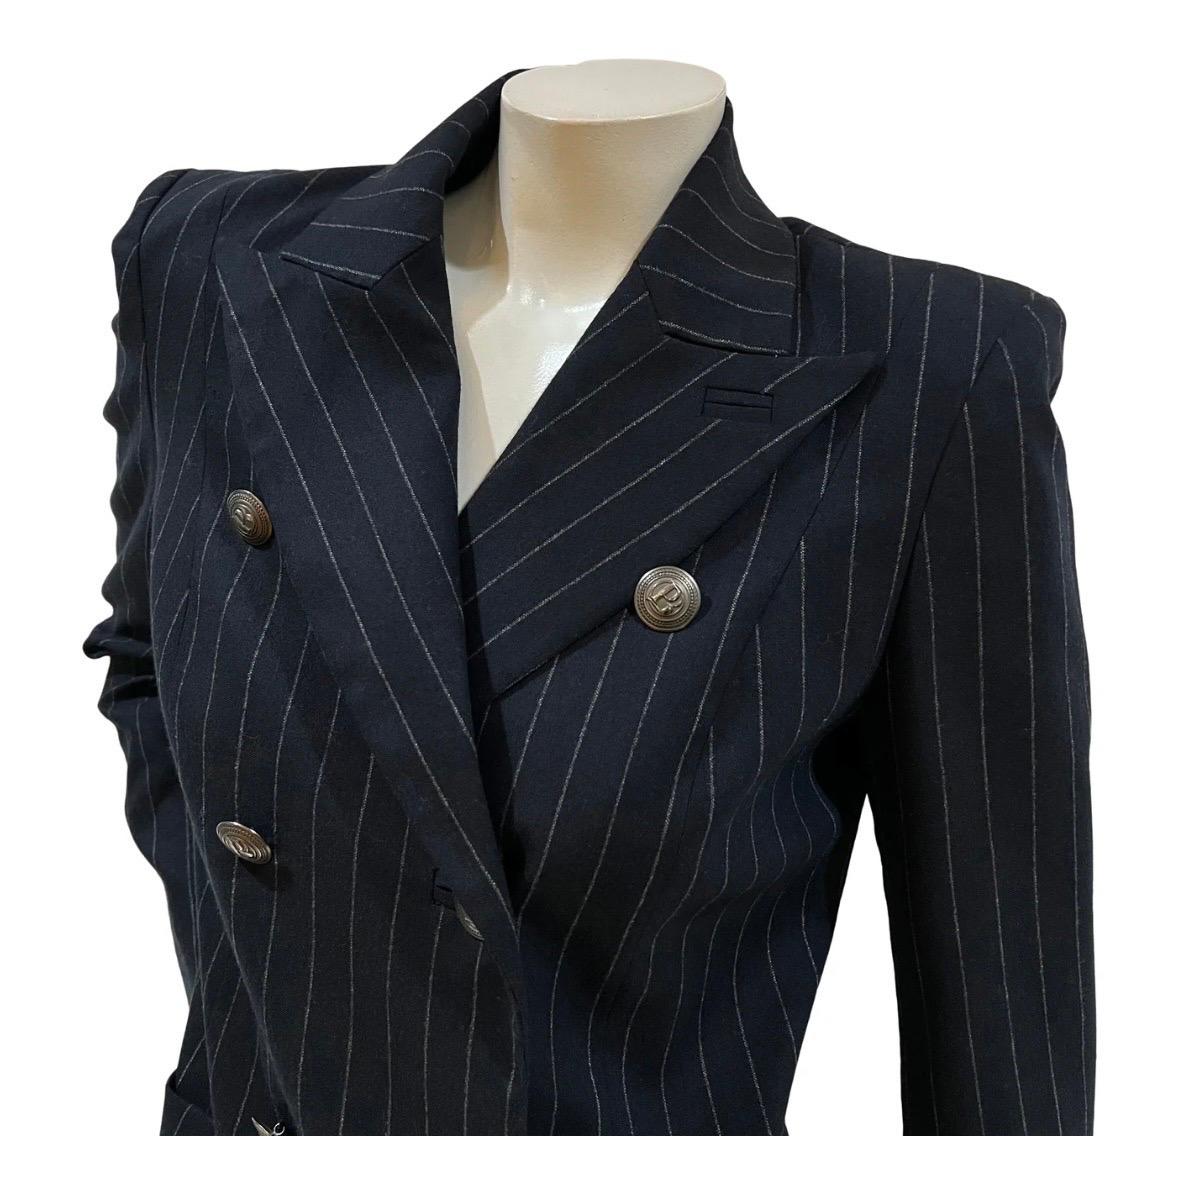 Designer Pinstripe Jacket by Pierre Balmain   
Circa 2010
Dark navy blue with white pinstripes throughout 
Double breasted front closure
Silver-tone metal logo buttons
Four logo buttons on each cuff 
Shoulder pads
Dual front hip pockets
74% wool,